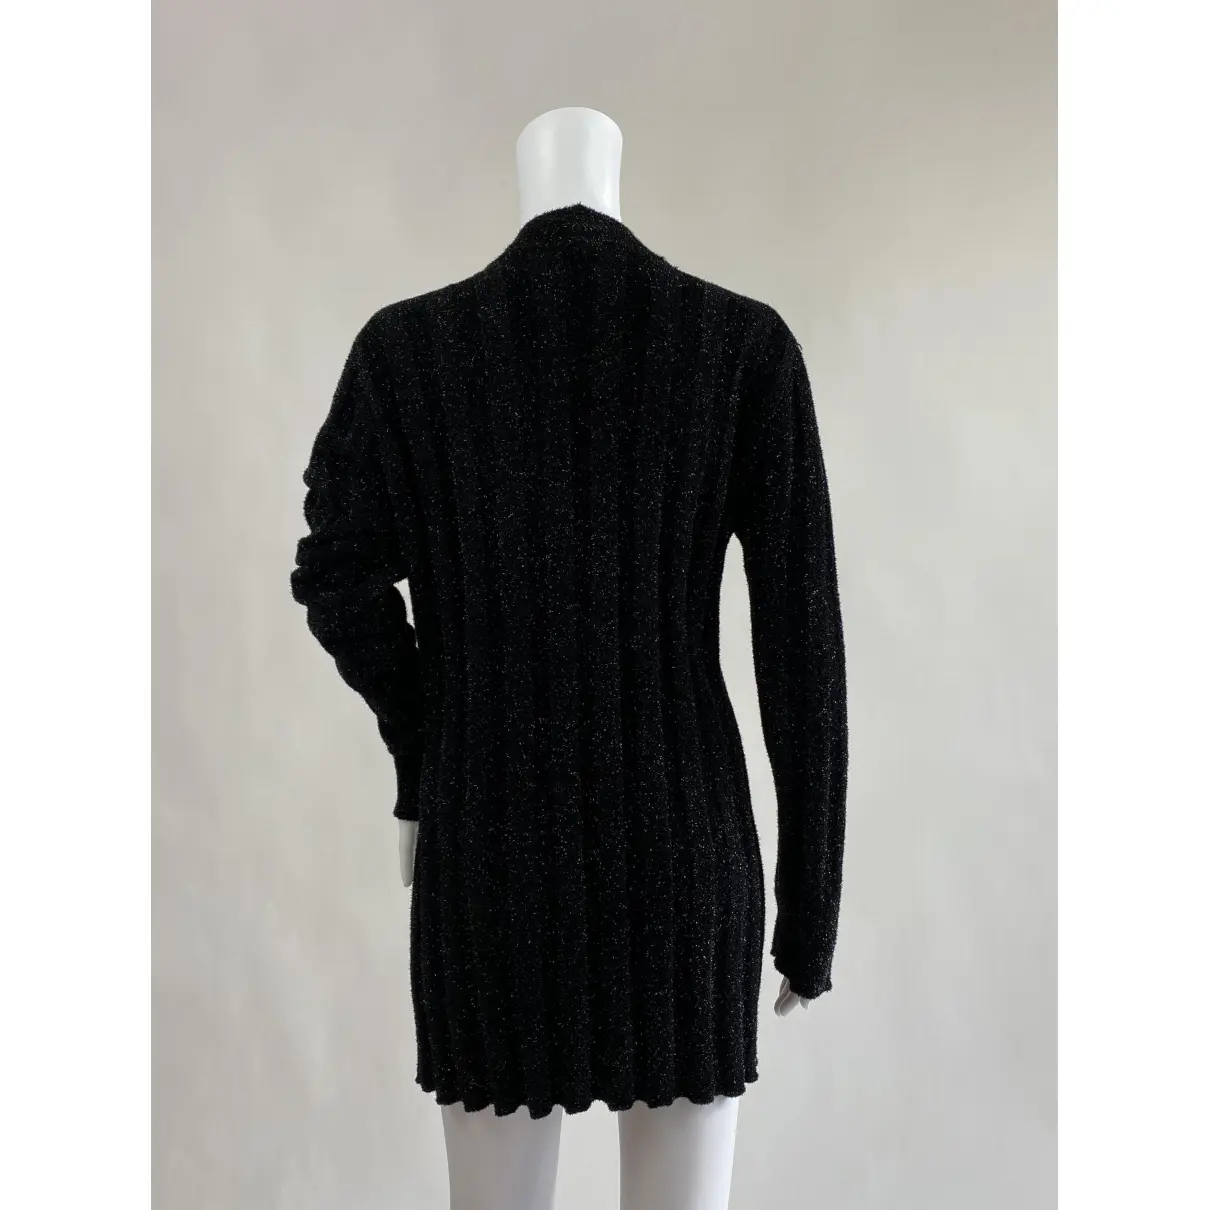 Buy Givenchy Black Synthetic Knitwear online - Vintage